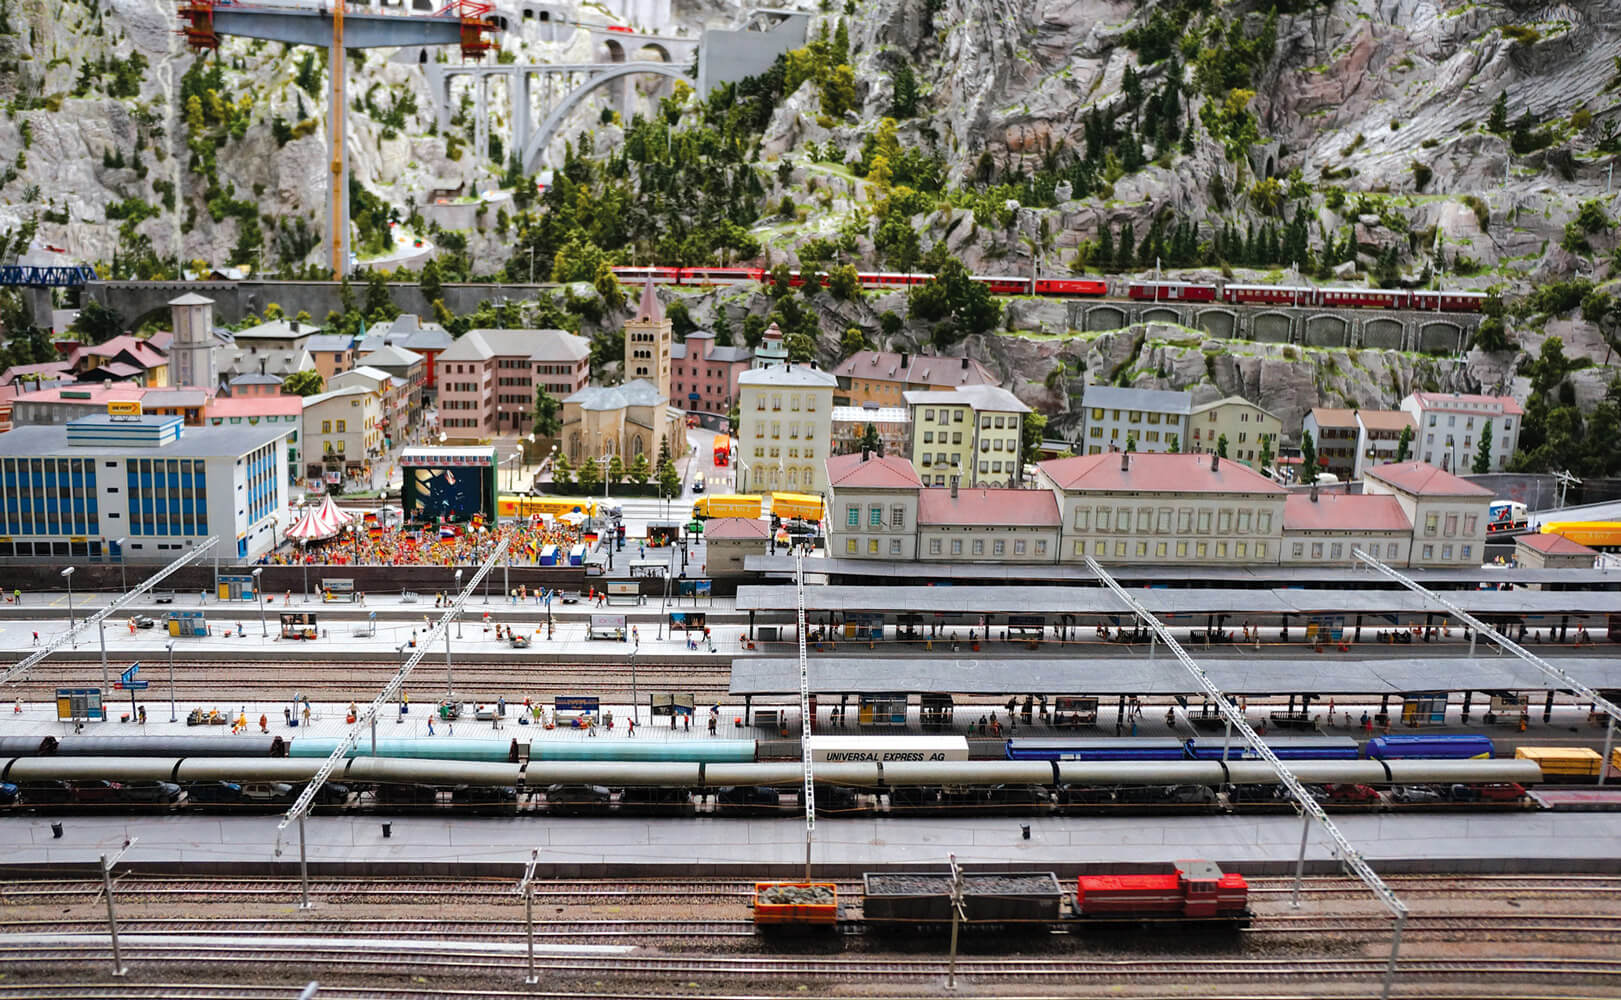 A photograph of a miniature train station at the Miniatur Wunderland.